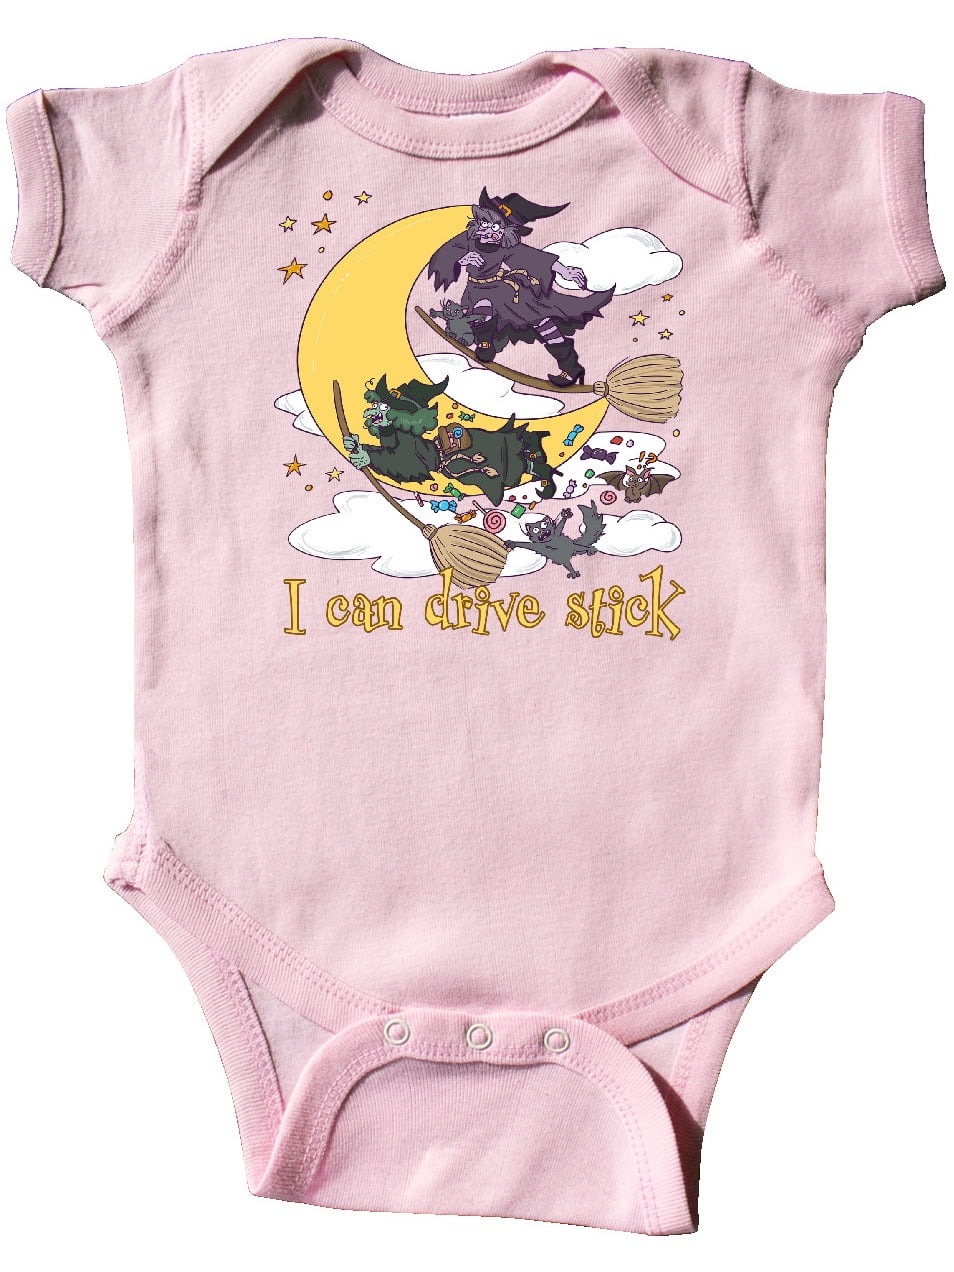 Details about   Other Ride A Flying Magical Broomstick Nerd Unisex Baby Infant Romper Newborn 